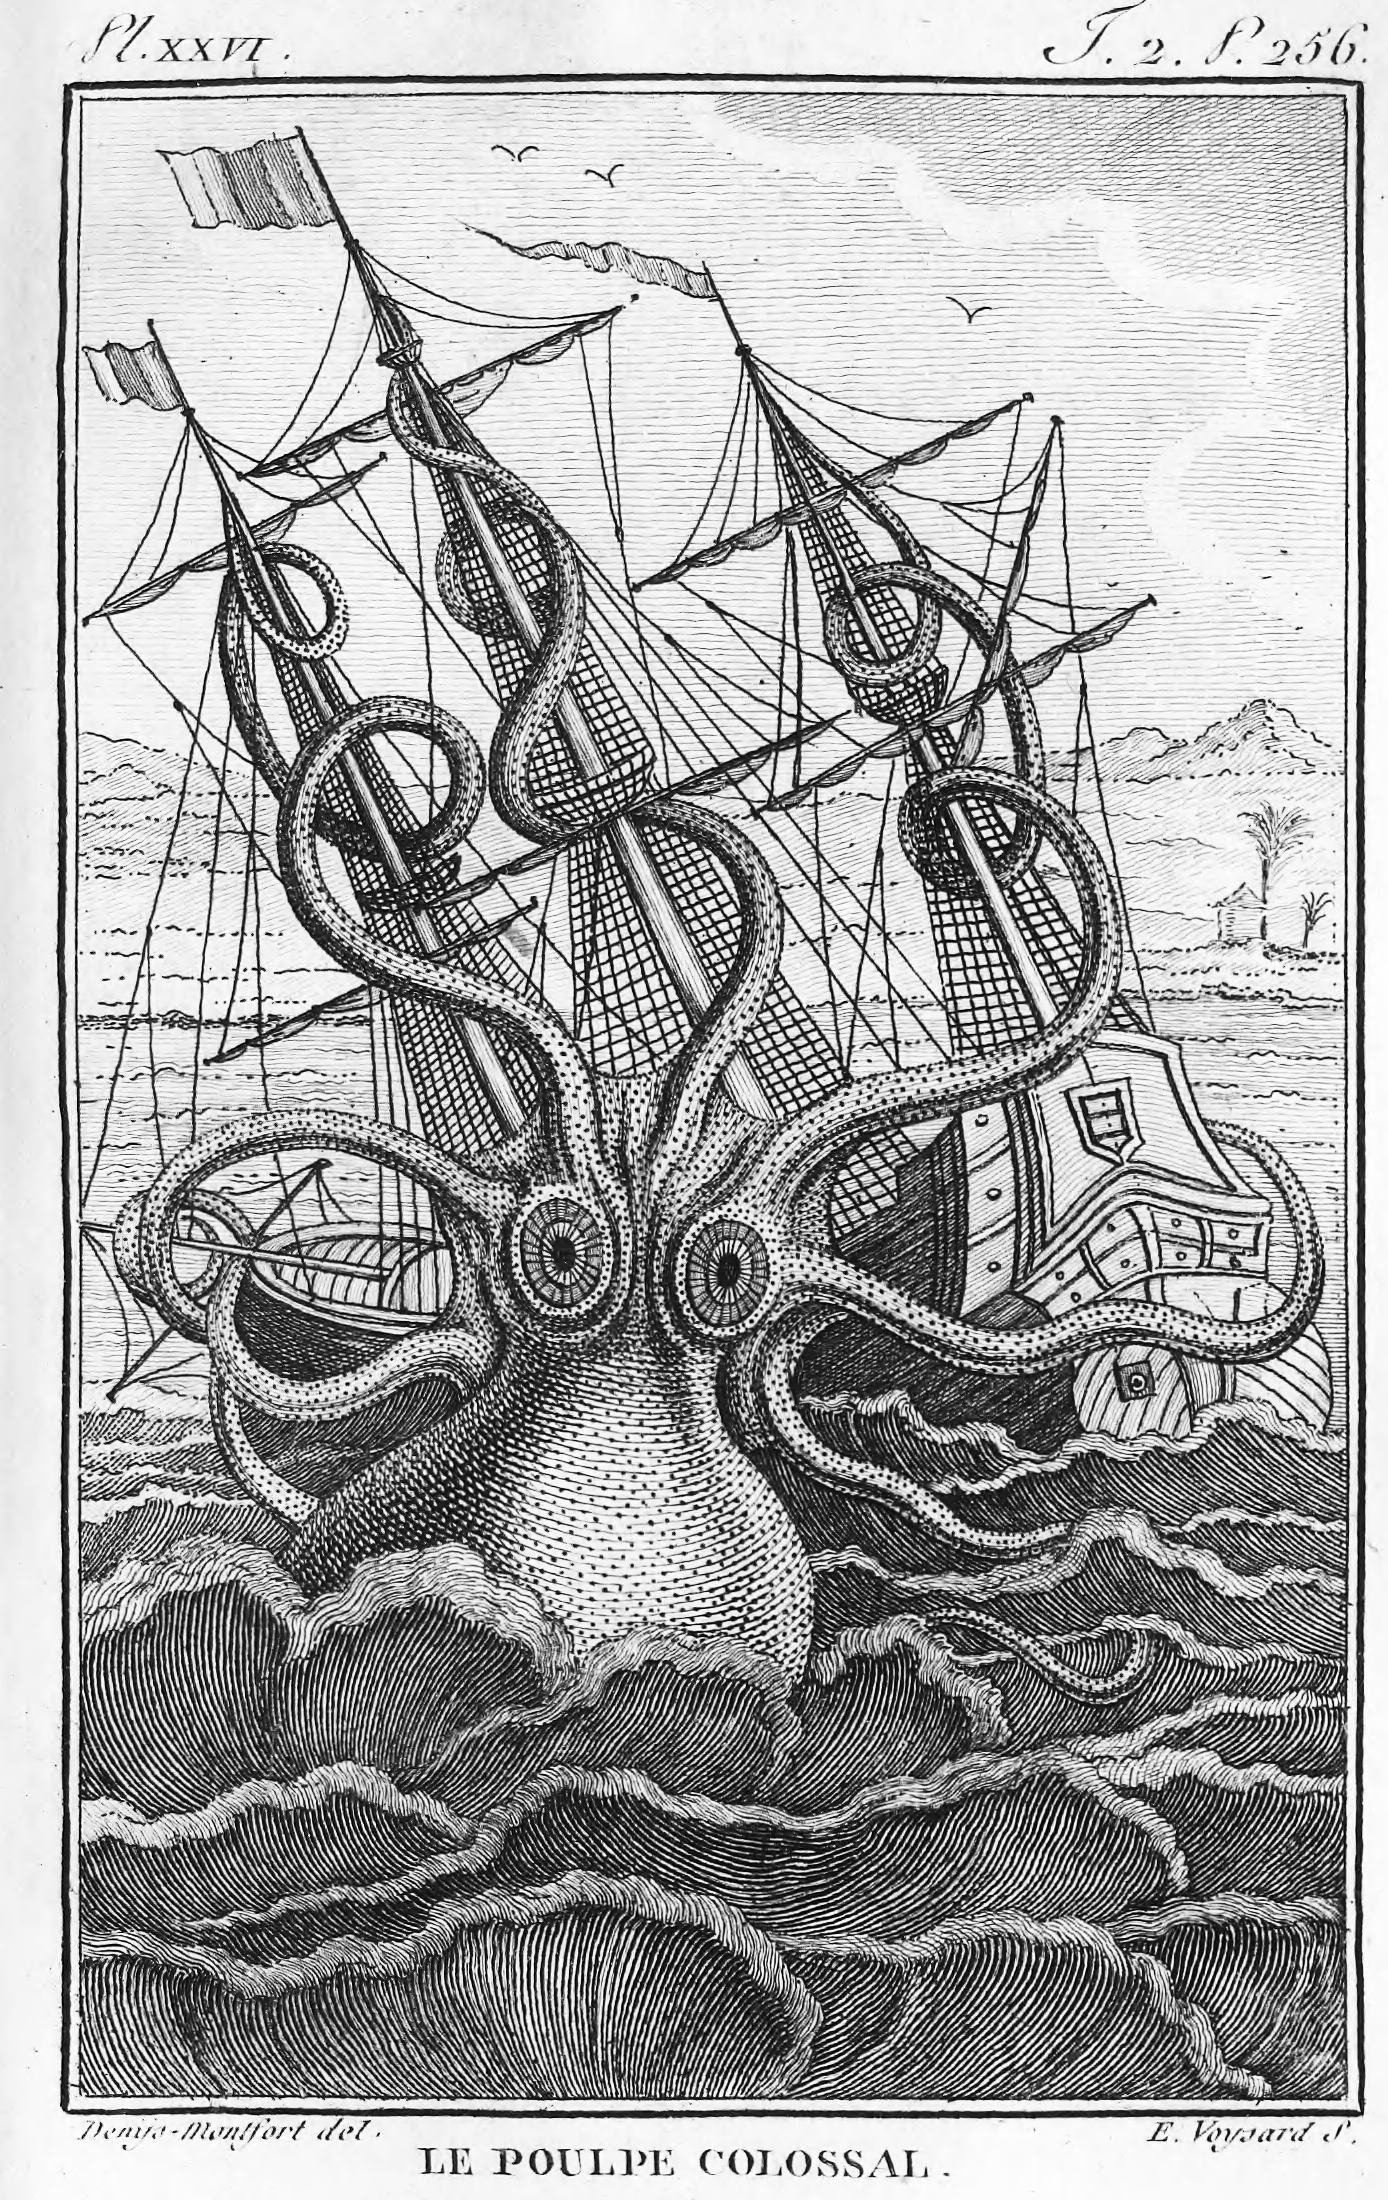 Le Pouple Colossal (Giant Octopus) from Denys-Monfort 1801